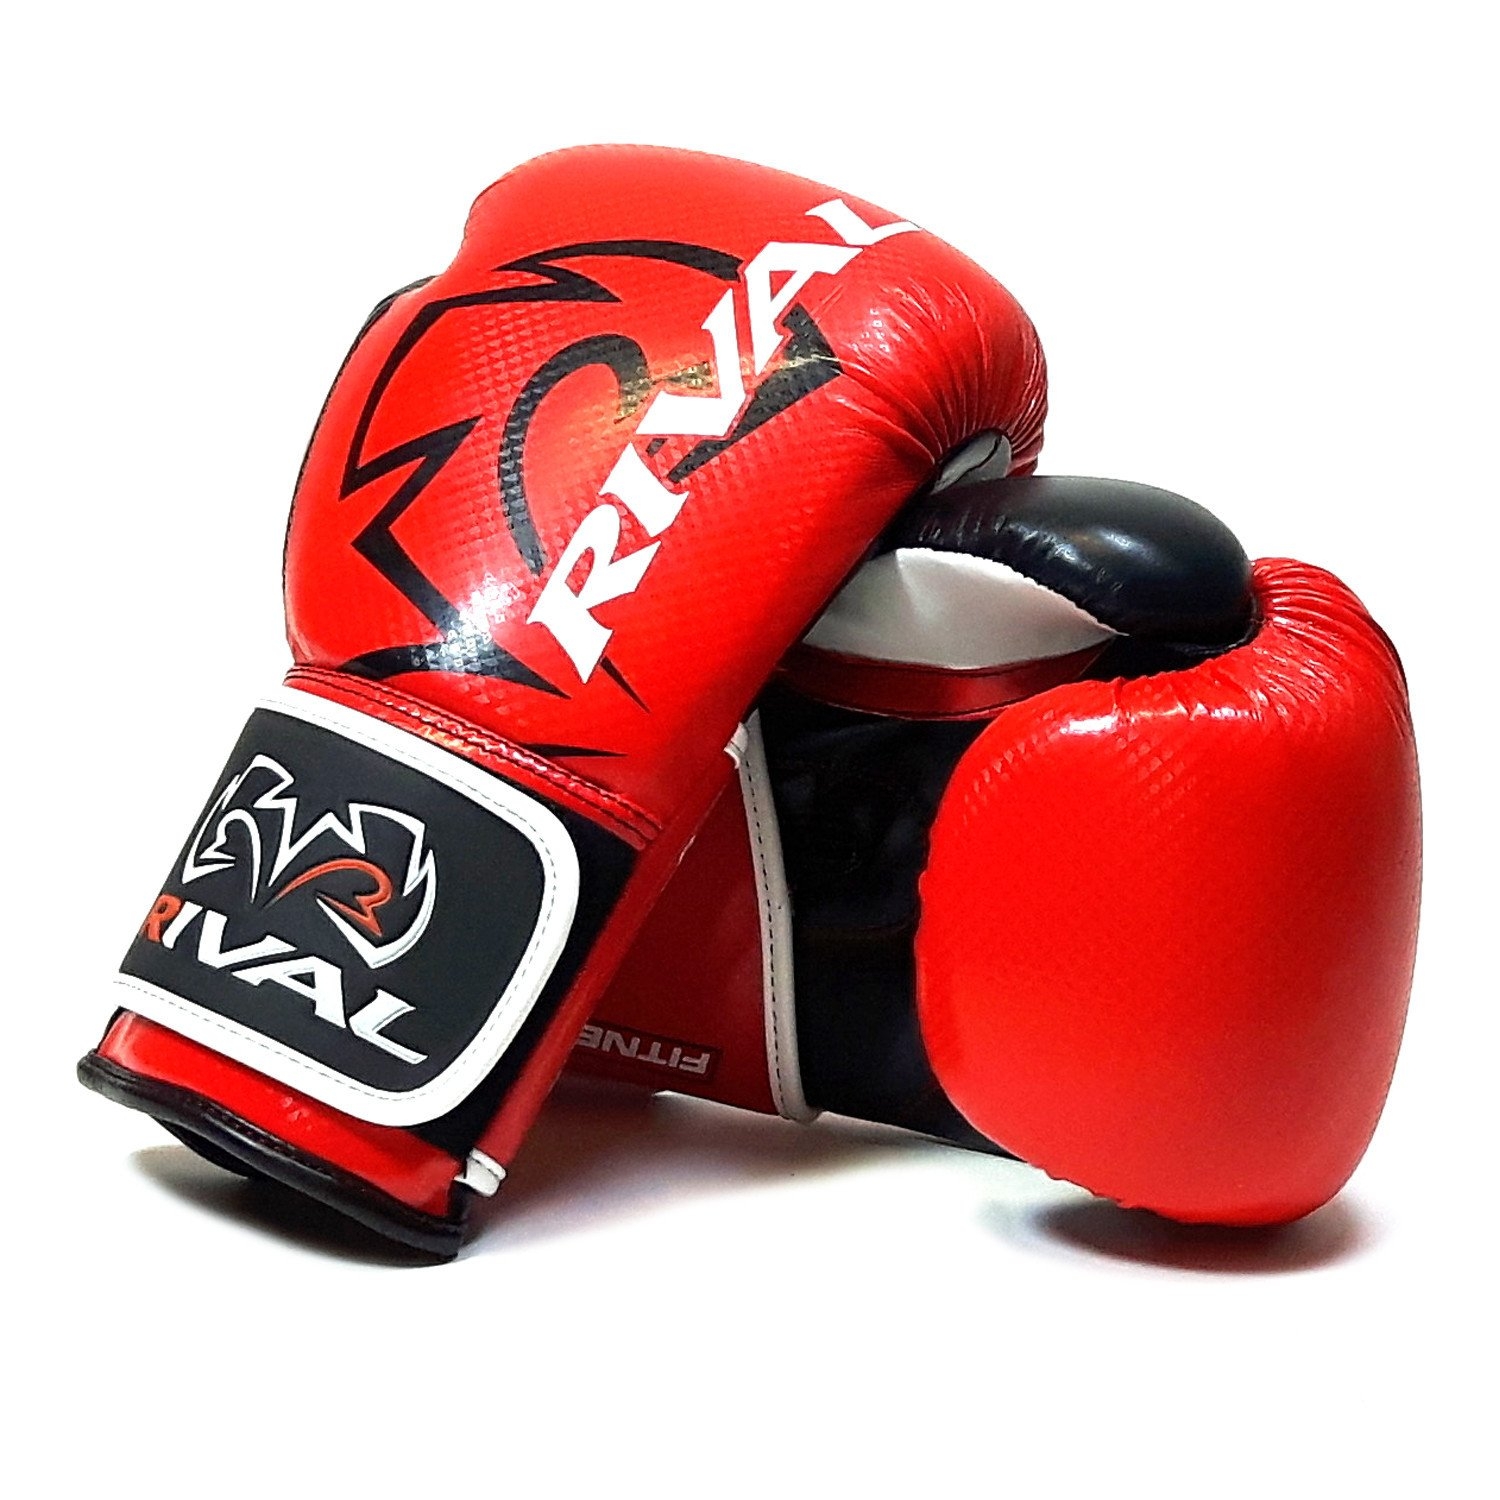 Rival Rb7 Fitness Bag Training Boxing Gloves Red Black  – Size: 14 – Adult – Unisex